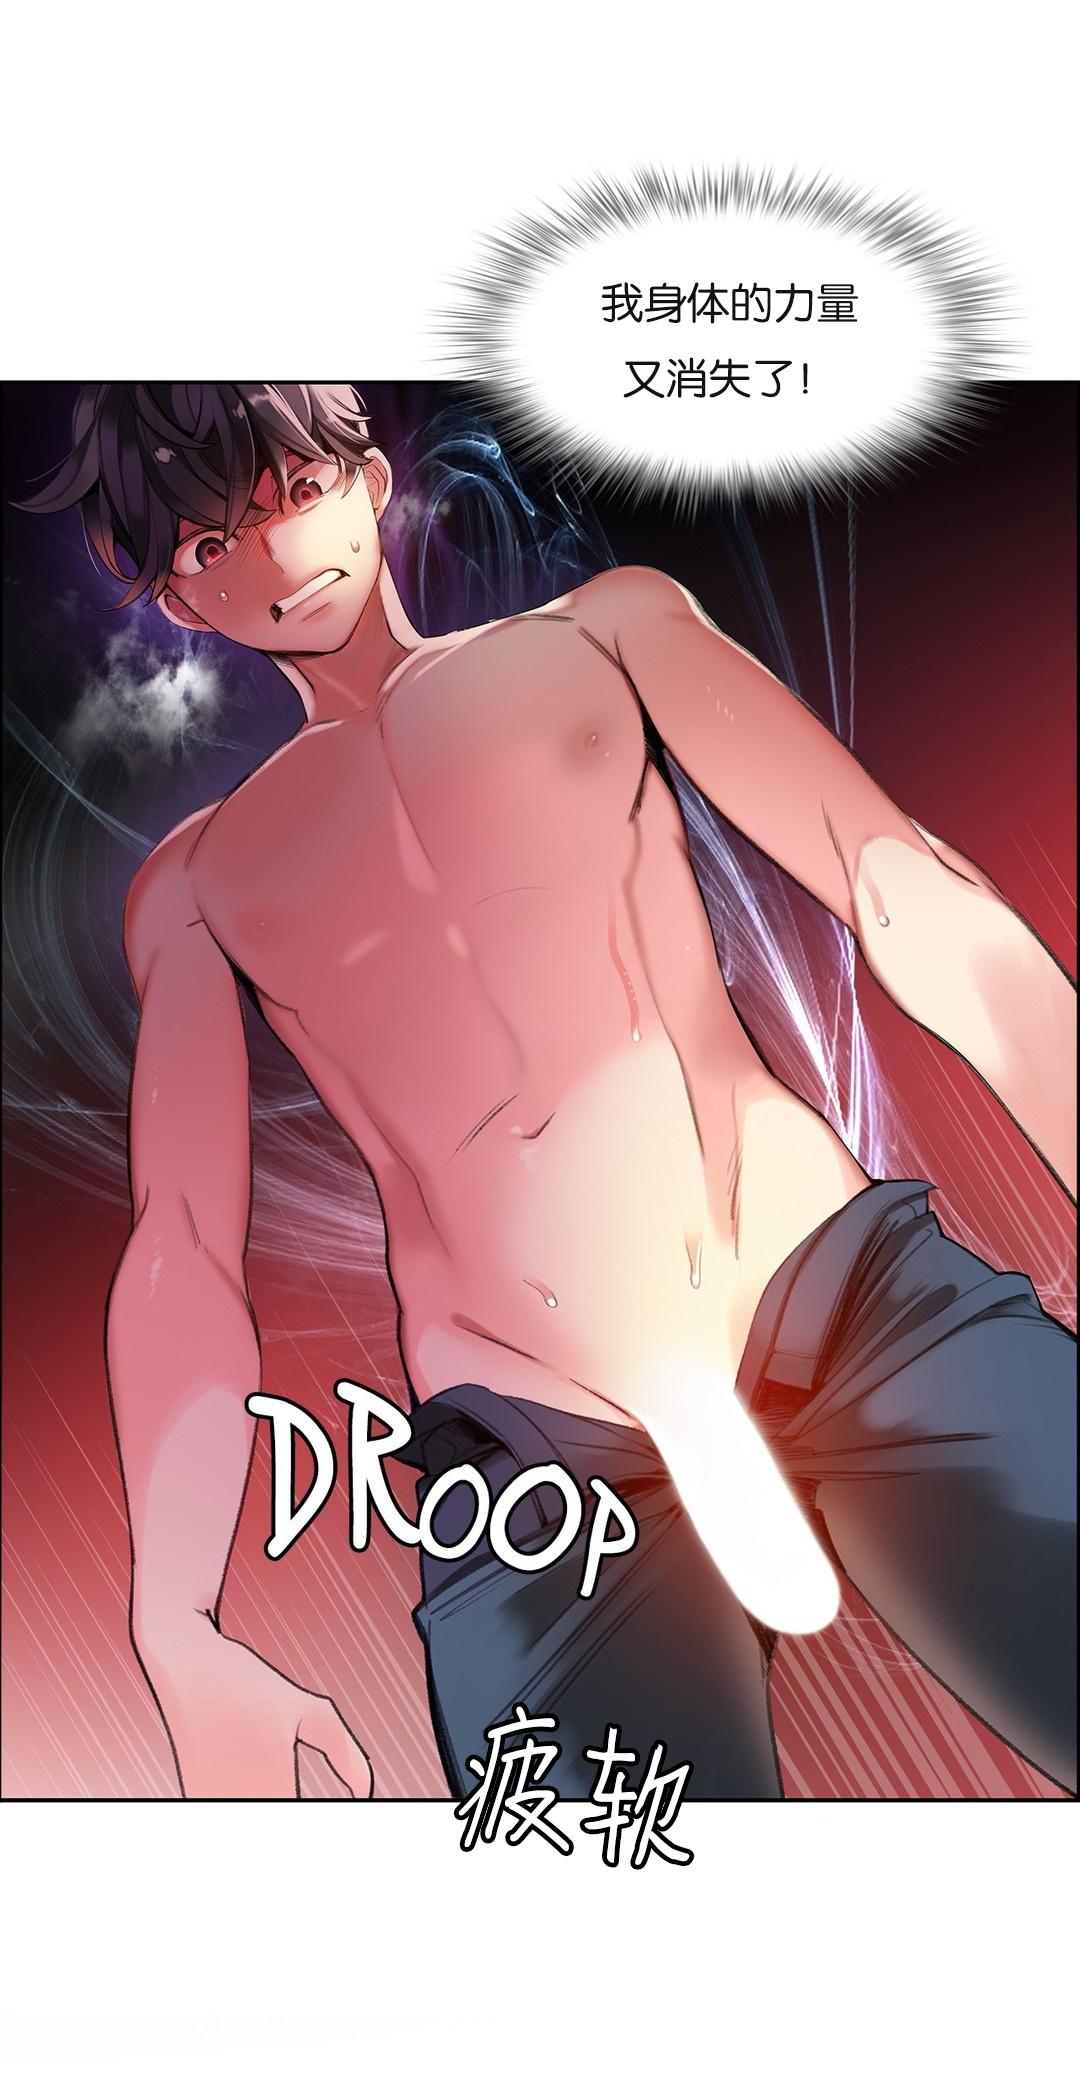 [Juder] Lilith`s Cord (第二季) Ch.61-64 [Chinese] [aaatwist个人汉化] [Ongoing] 142